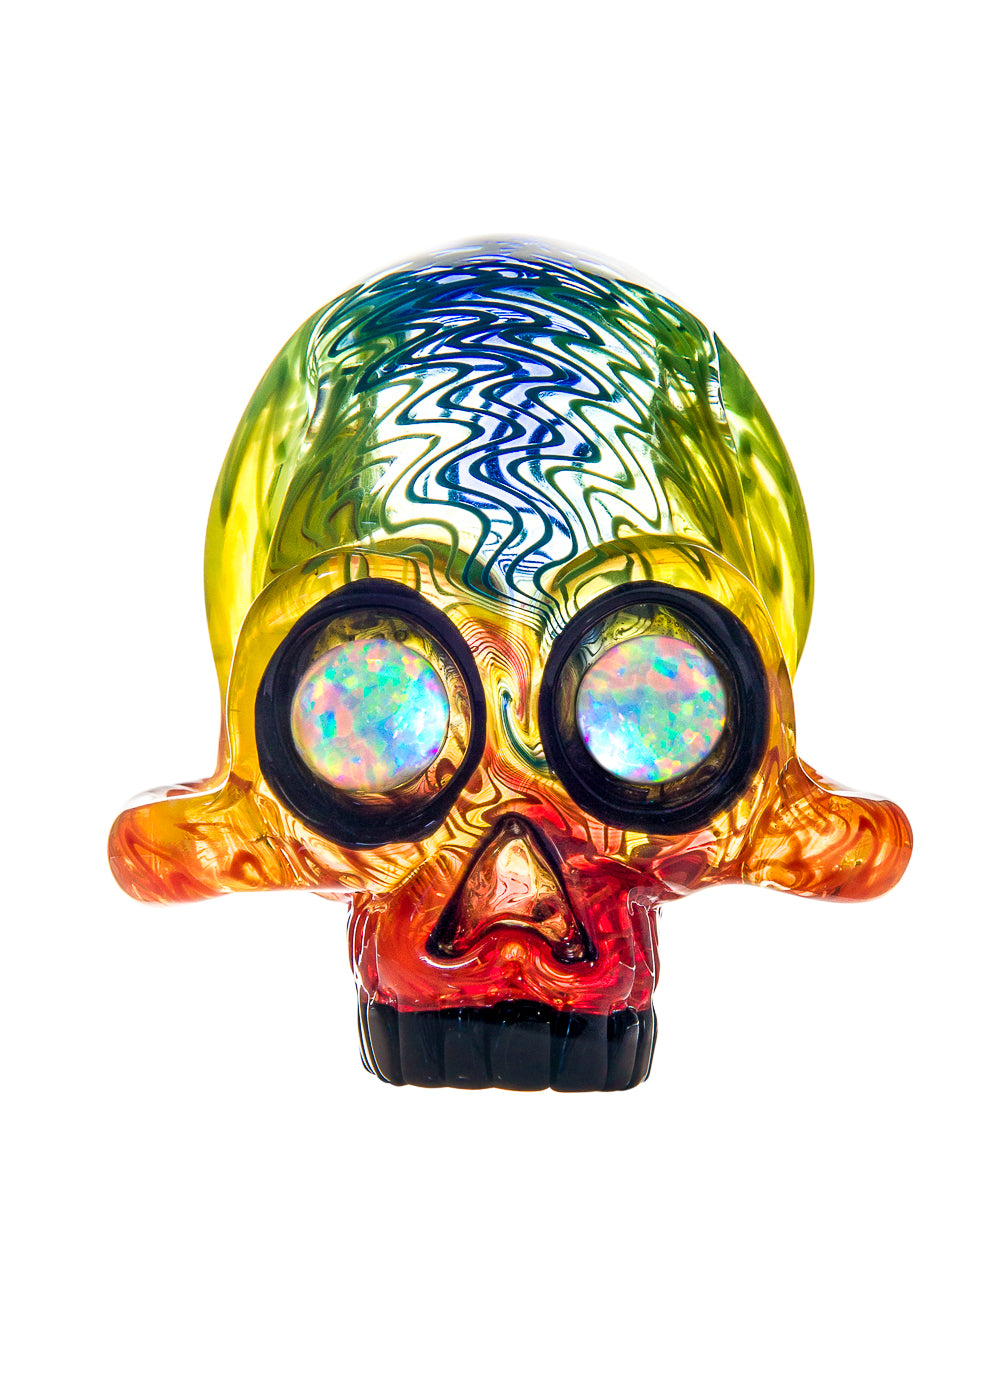 Illuzion Glass Galleries 2017 Annual 420 Party Collaboration Skull Pendant #1 by AKM and Cowboy